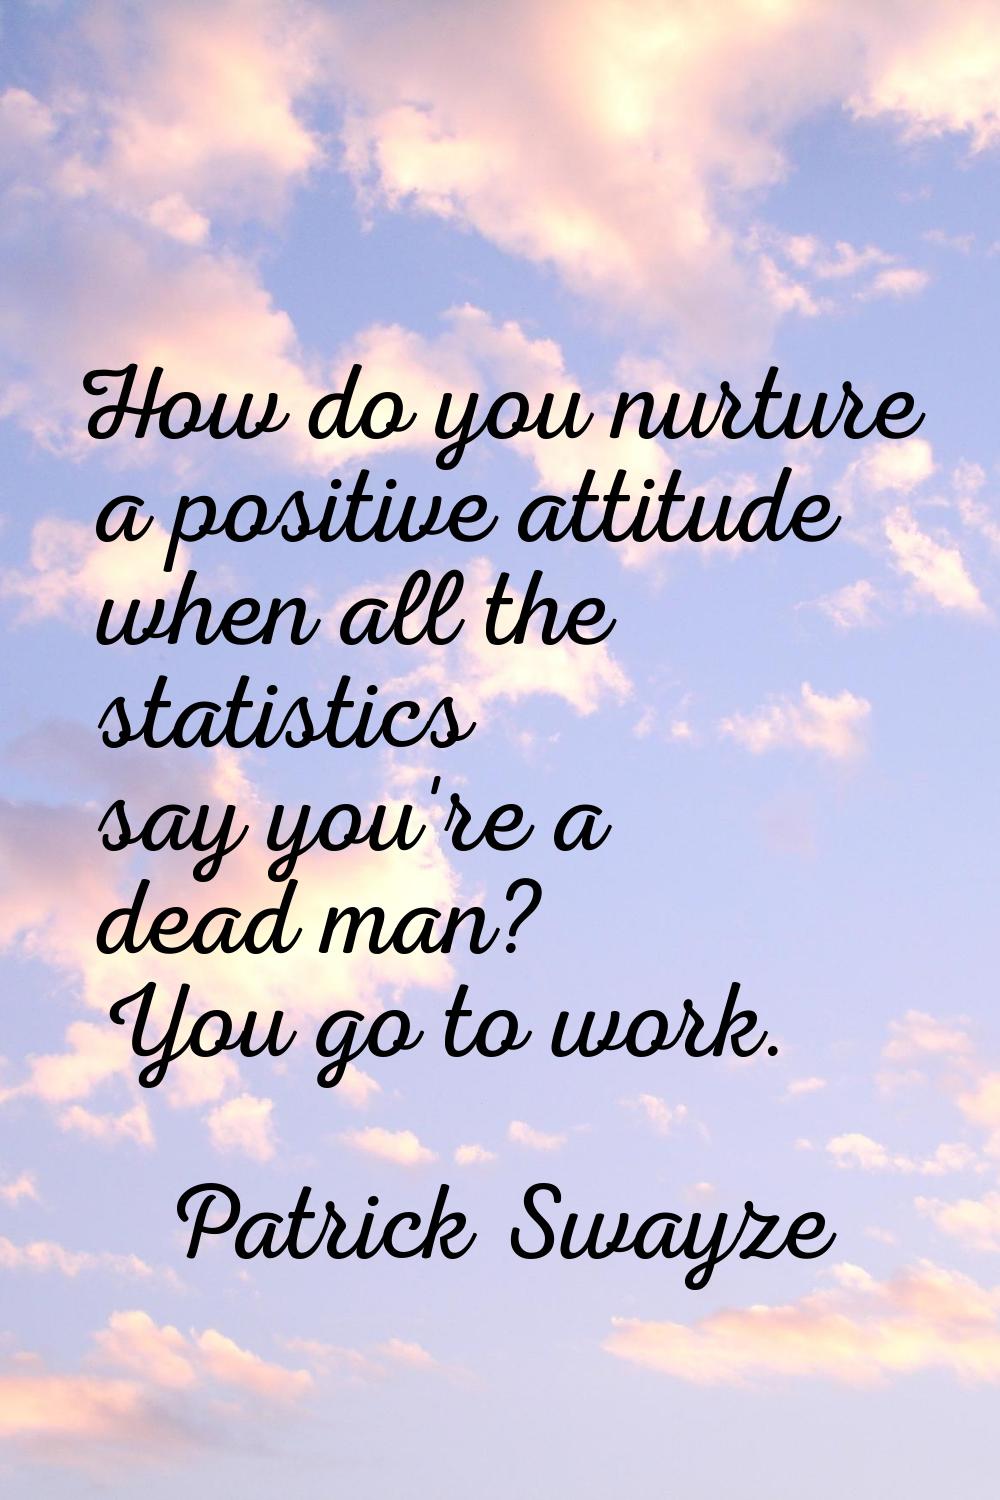 How do you nurture a positive attitude when all the statistics say you're a dead man? You go to wor